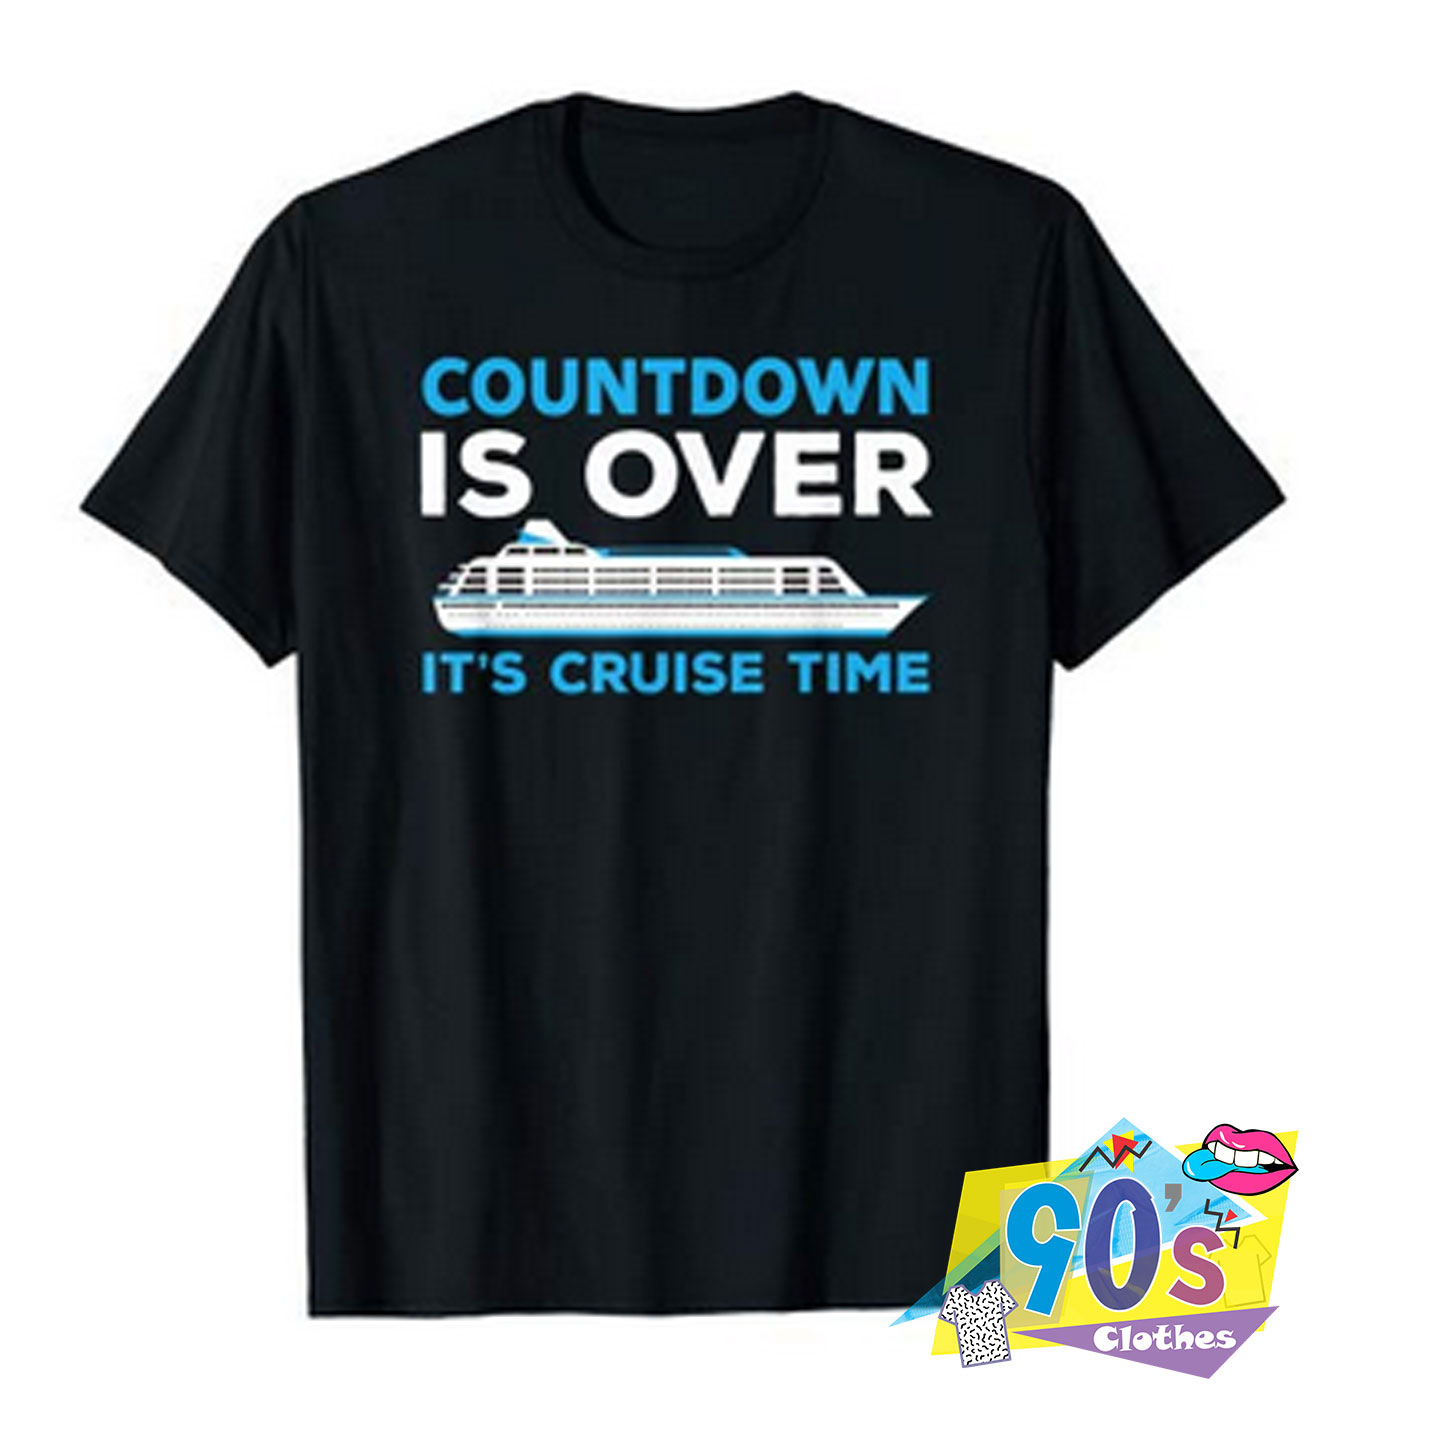 Get Buy Countdown Is Over Its Cruise Time T shirt - 90sclothes.com